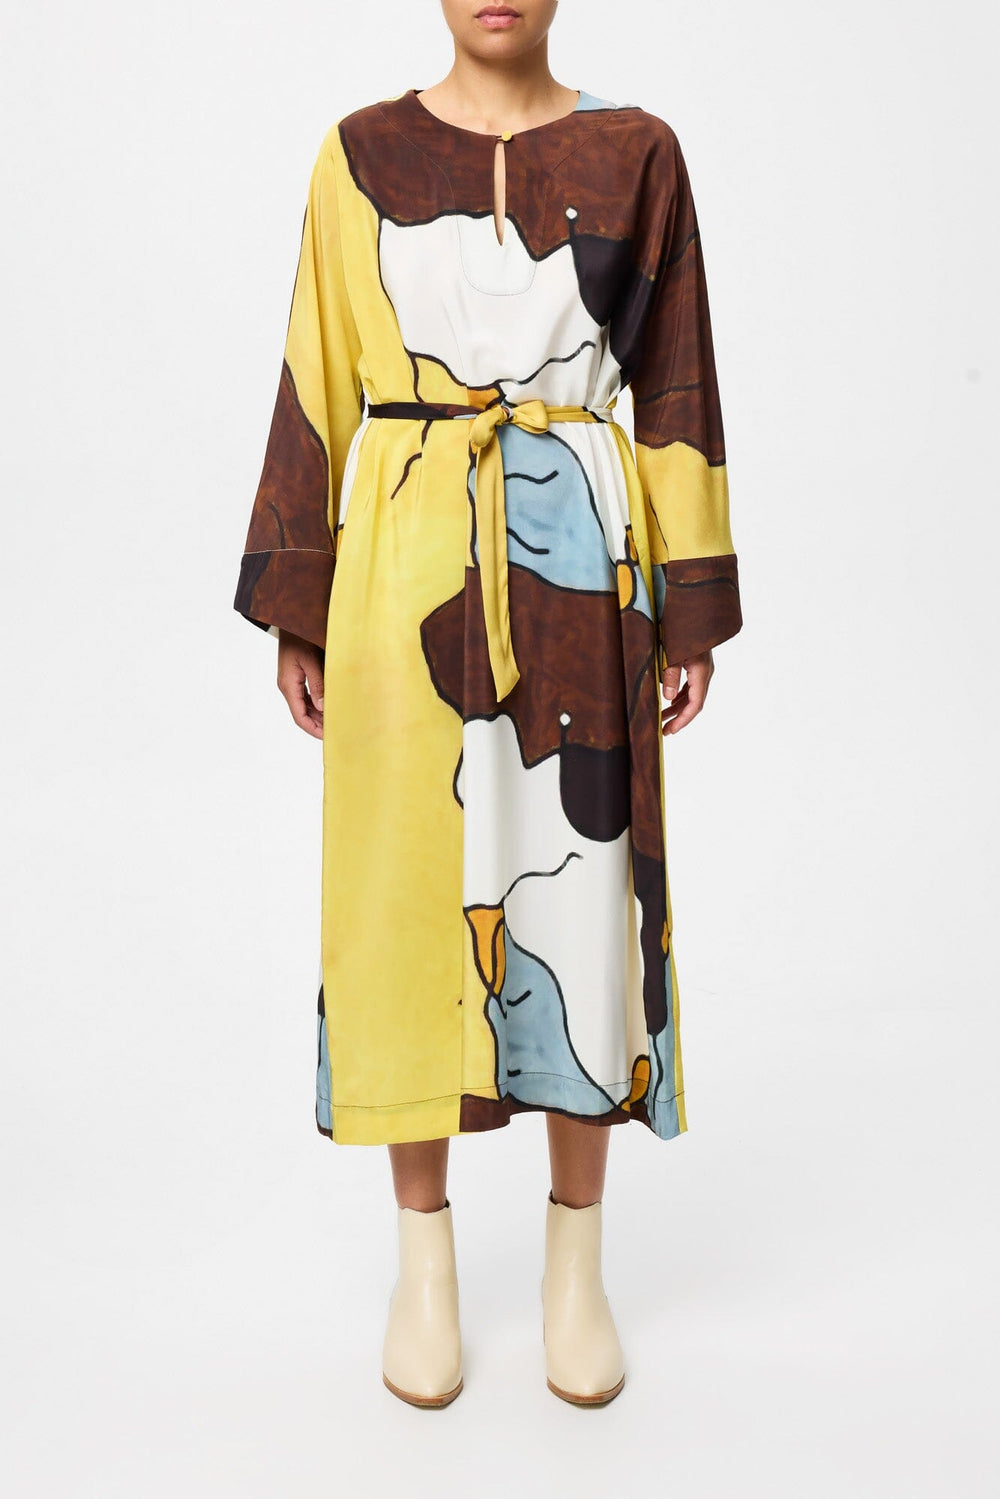 Common Ground Silk Kaftan - Late April Delivery